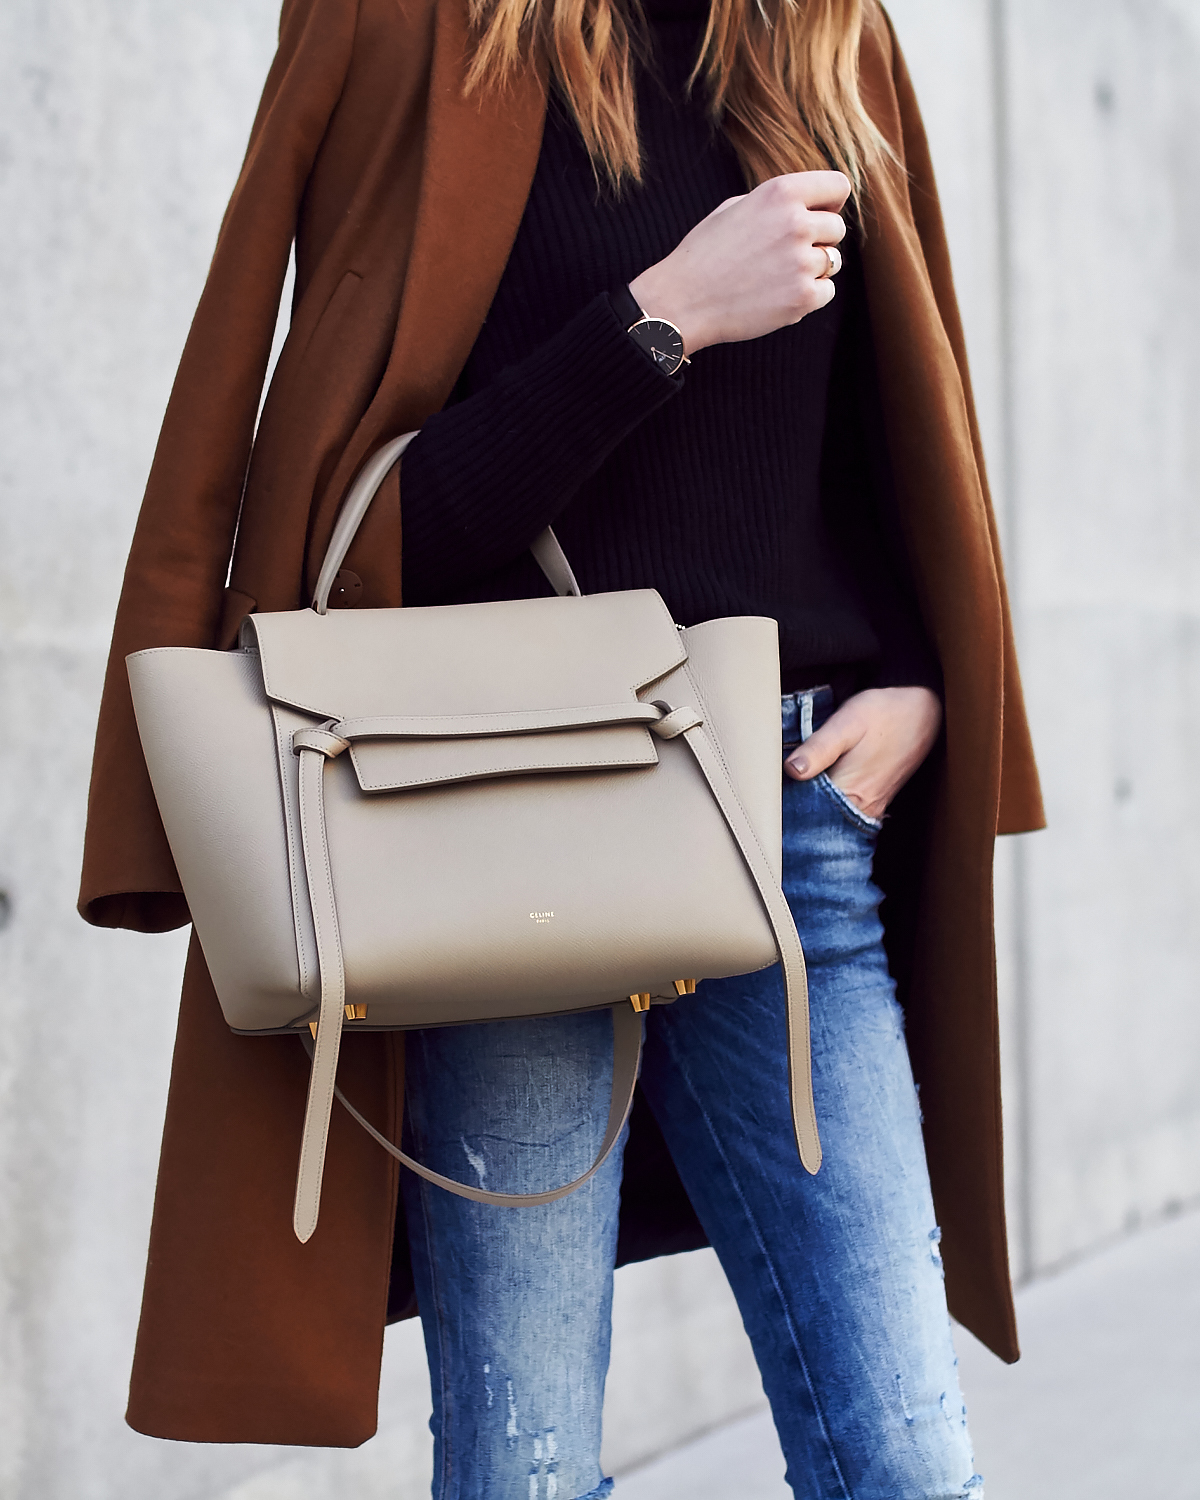 Fall Outfit, Winter Outfit, Tan Topcoat, Black Sweater, Denim Ripped Skinny Jeans, Celine Tie Belt Bag